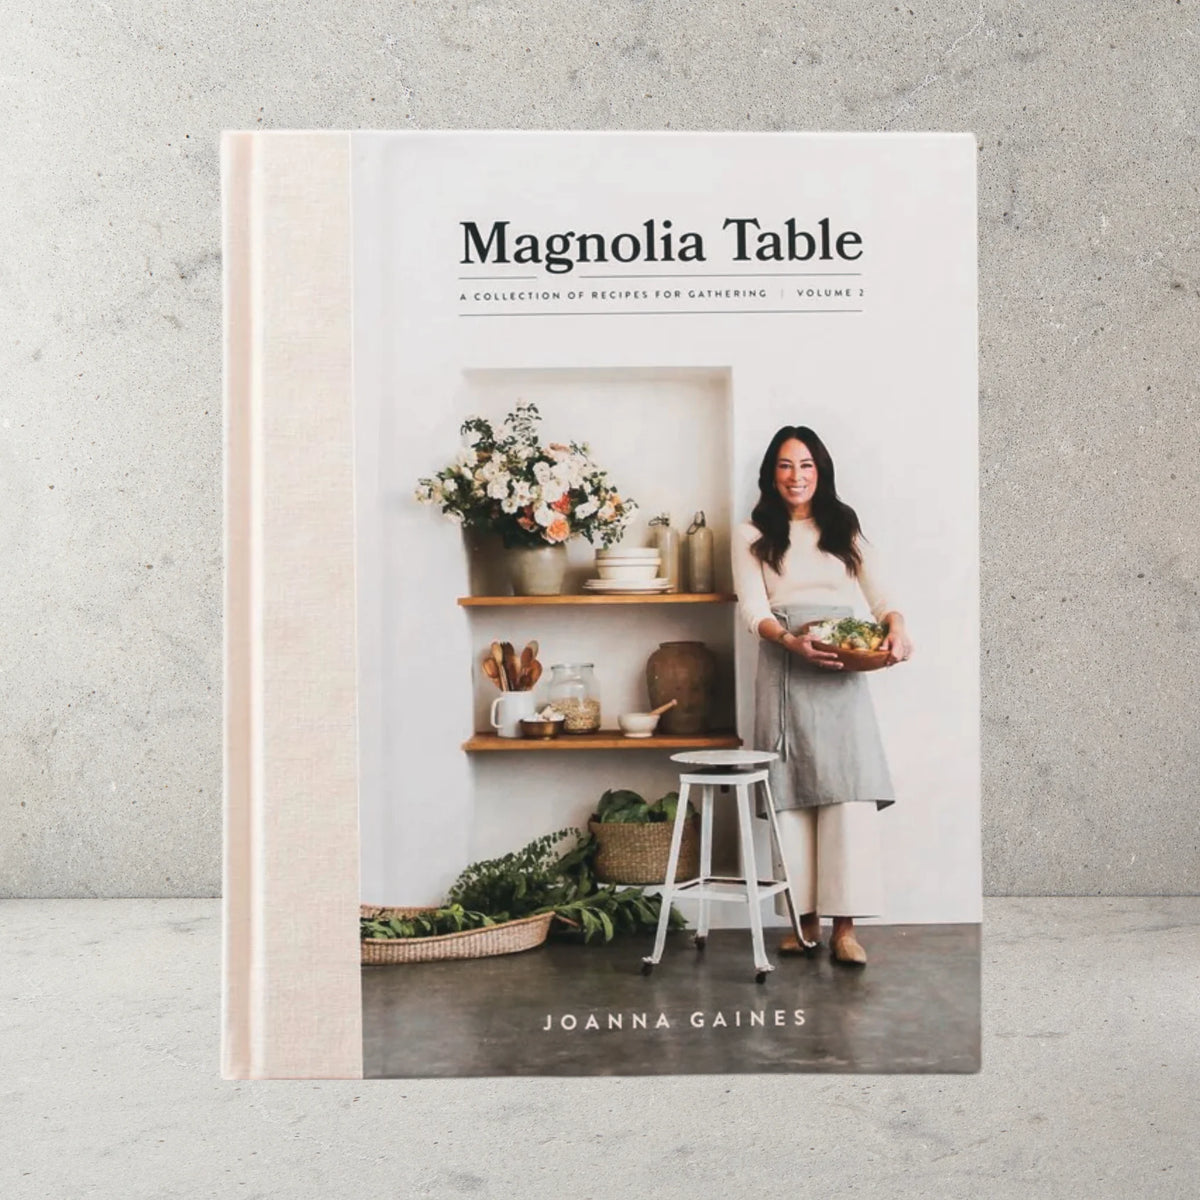 Magnolia Table Cookbook with hard cover by Joanna Gaines. Cover show picture of Joanna with fresh flowers, styled shelves, utensils and more.